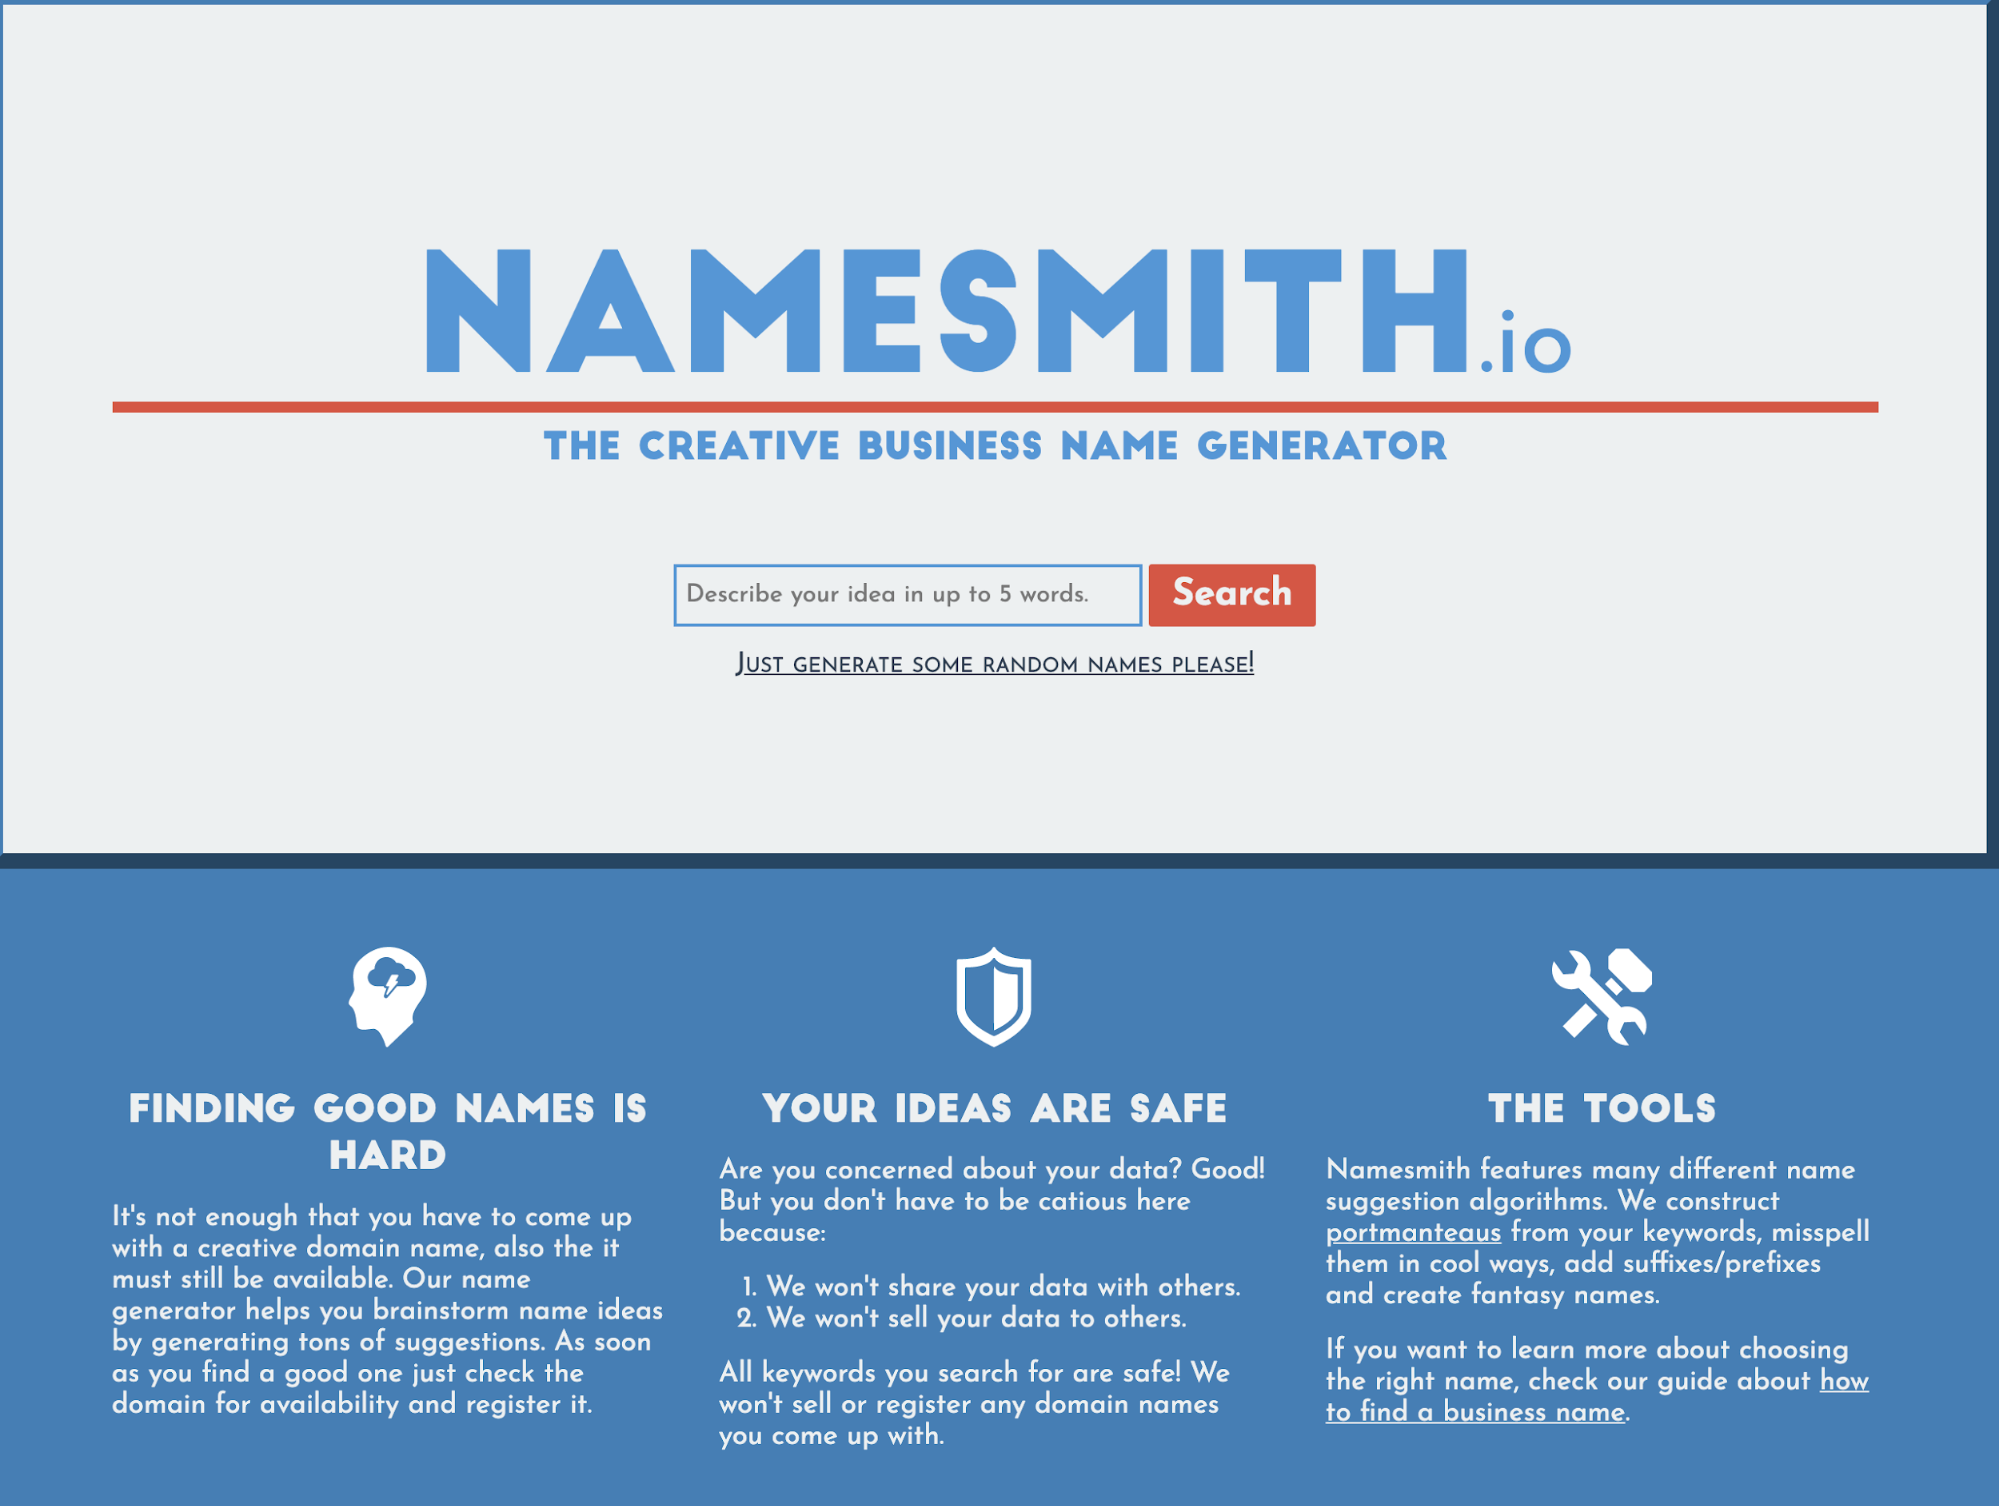 How to Choose Your Brand Name in 5 Simple Steps